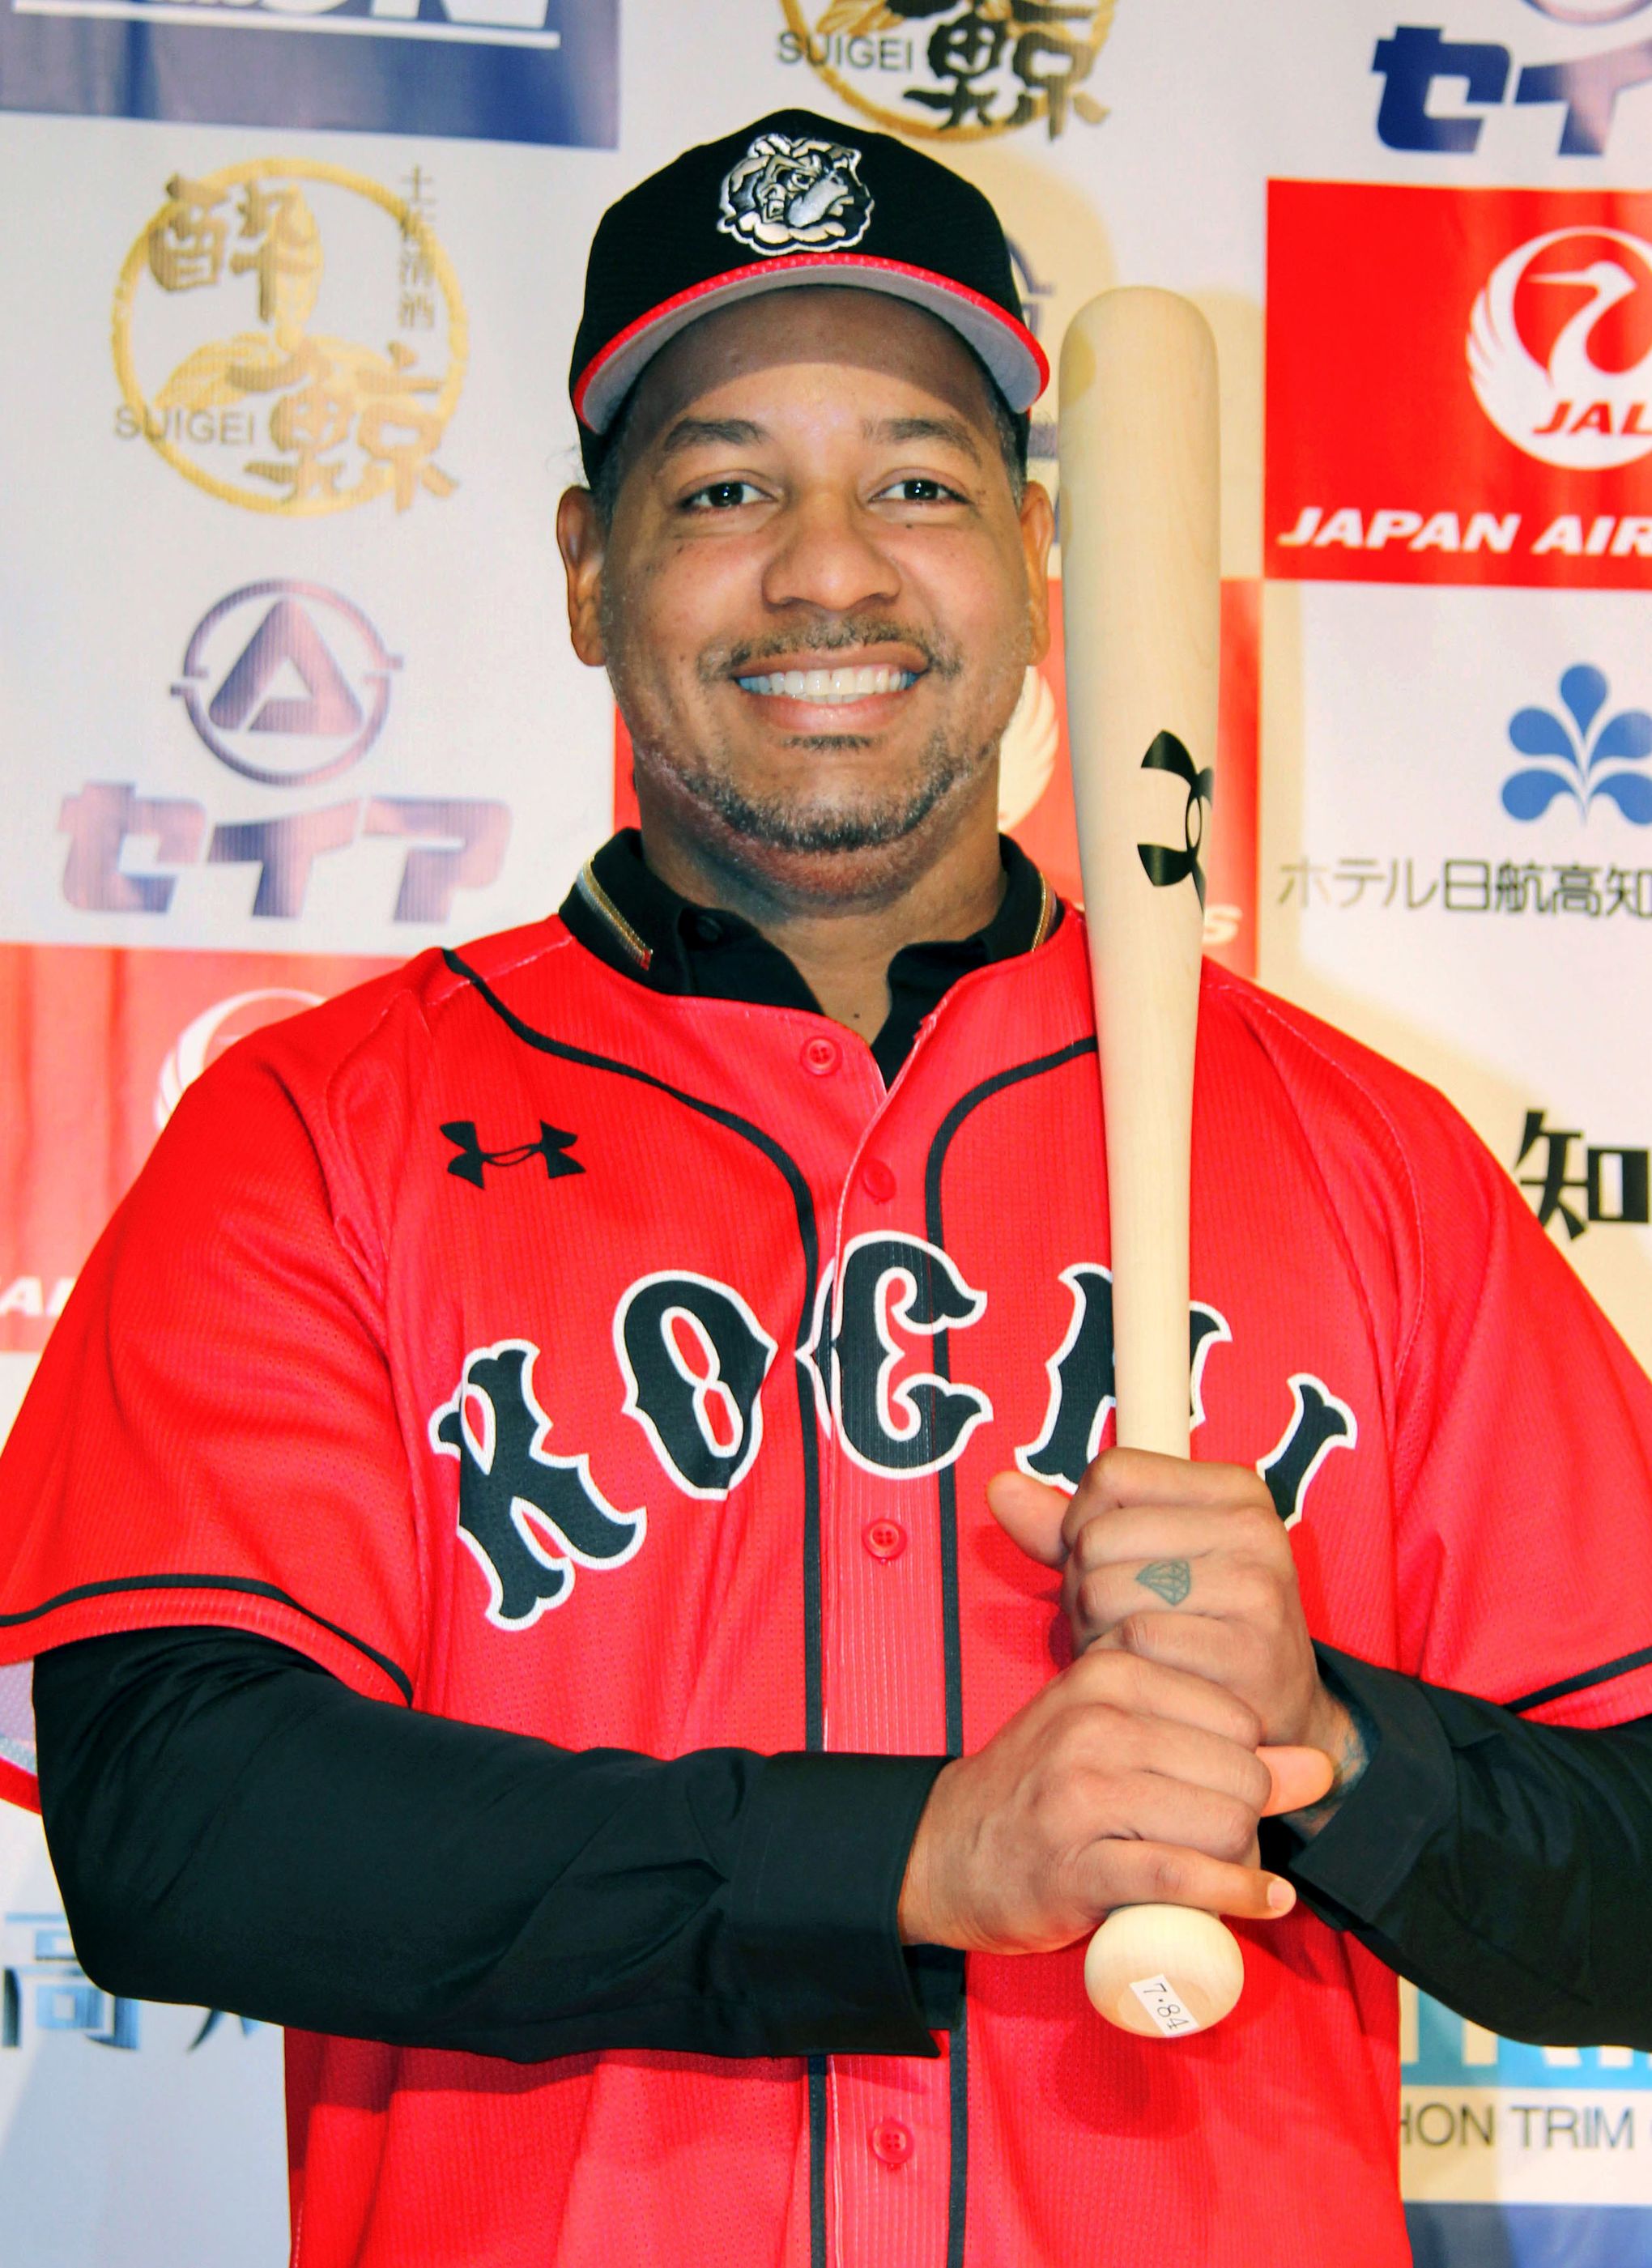 Manny Ramirez' new home far cry from bright lights of Tokyo